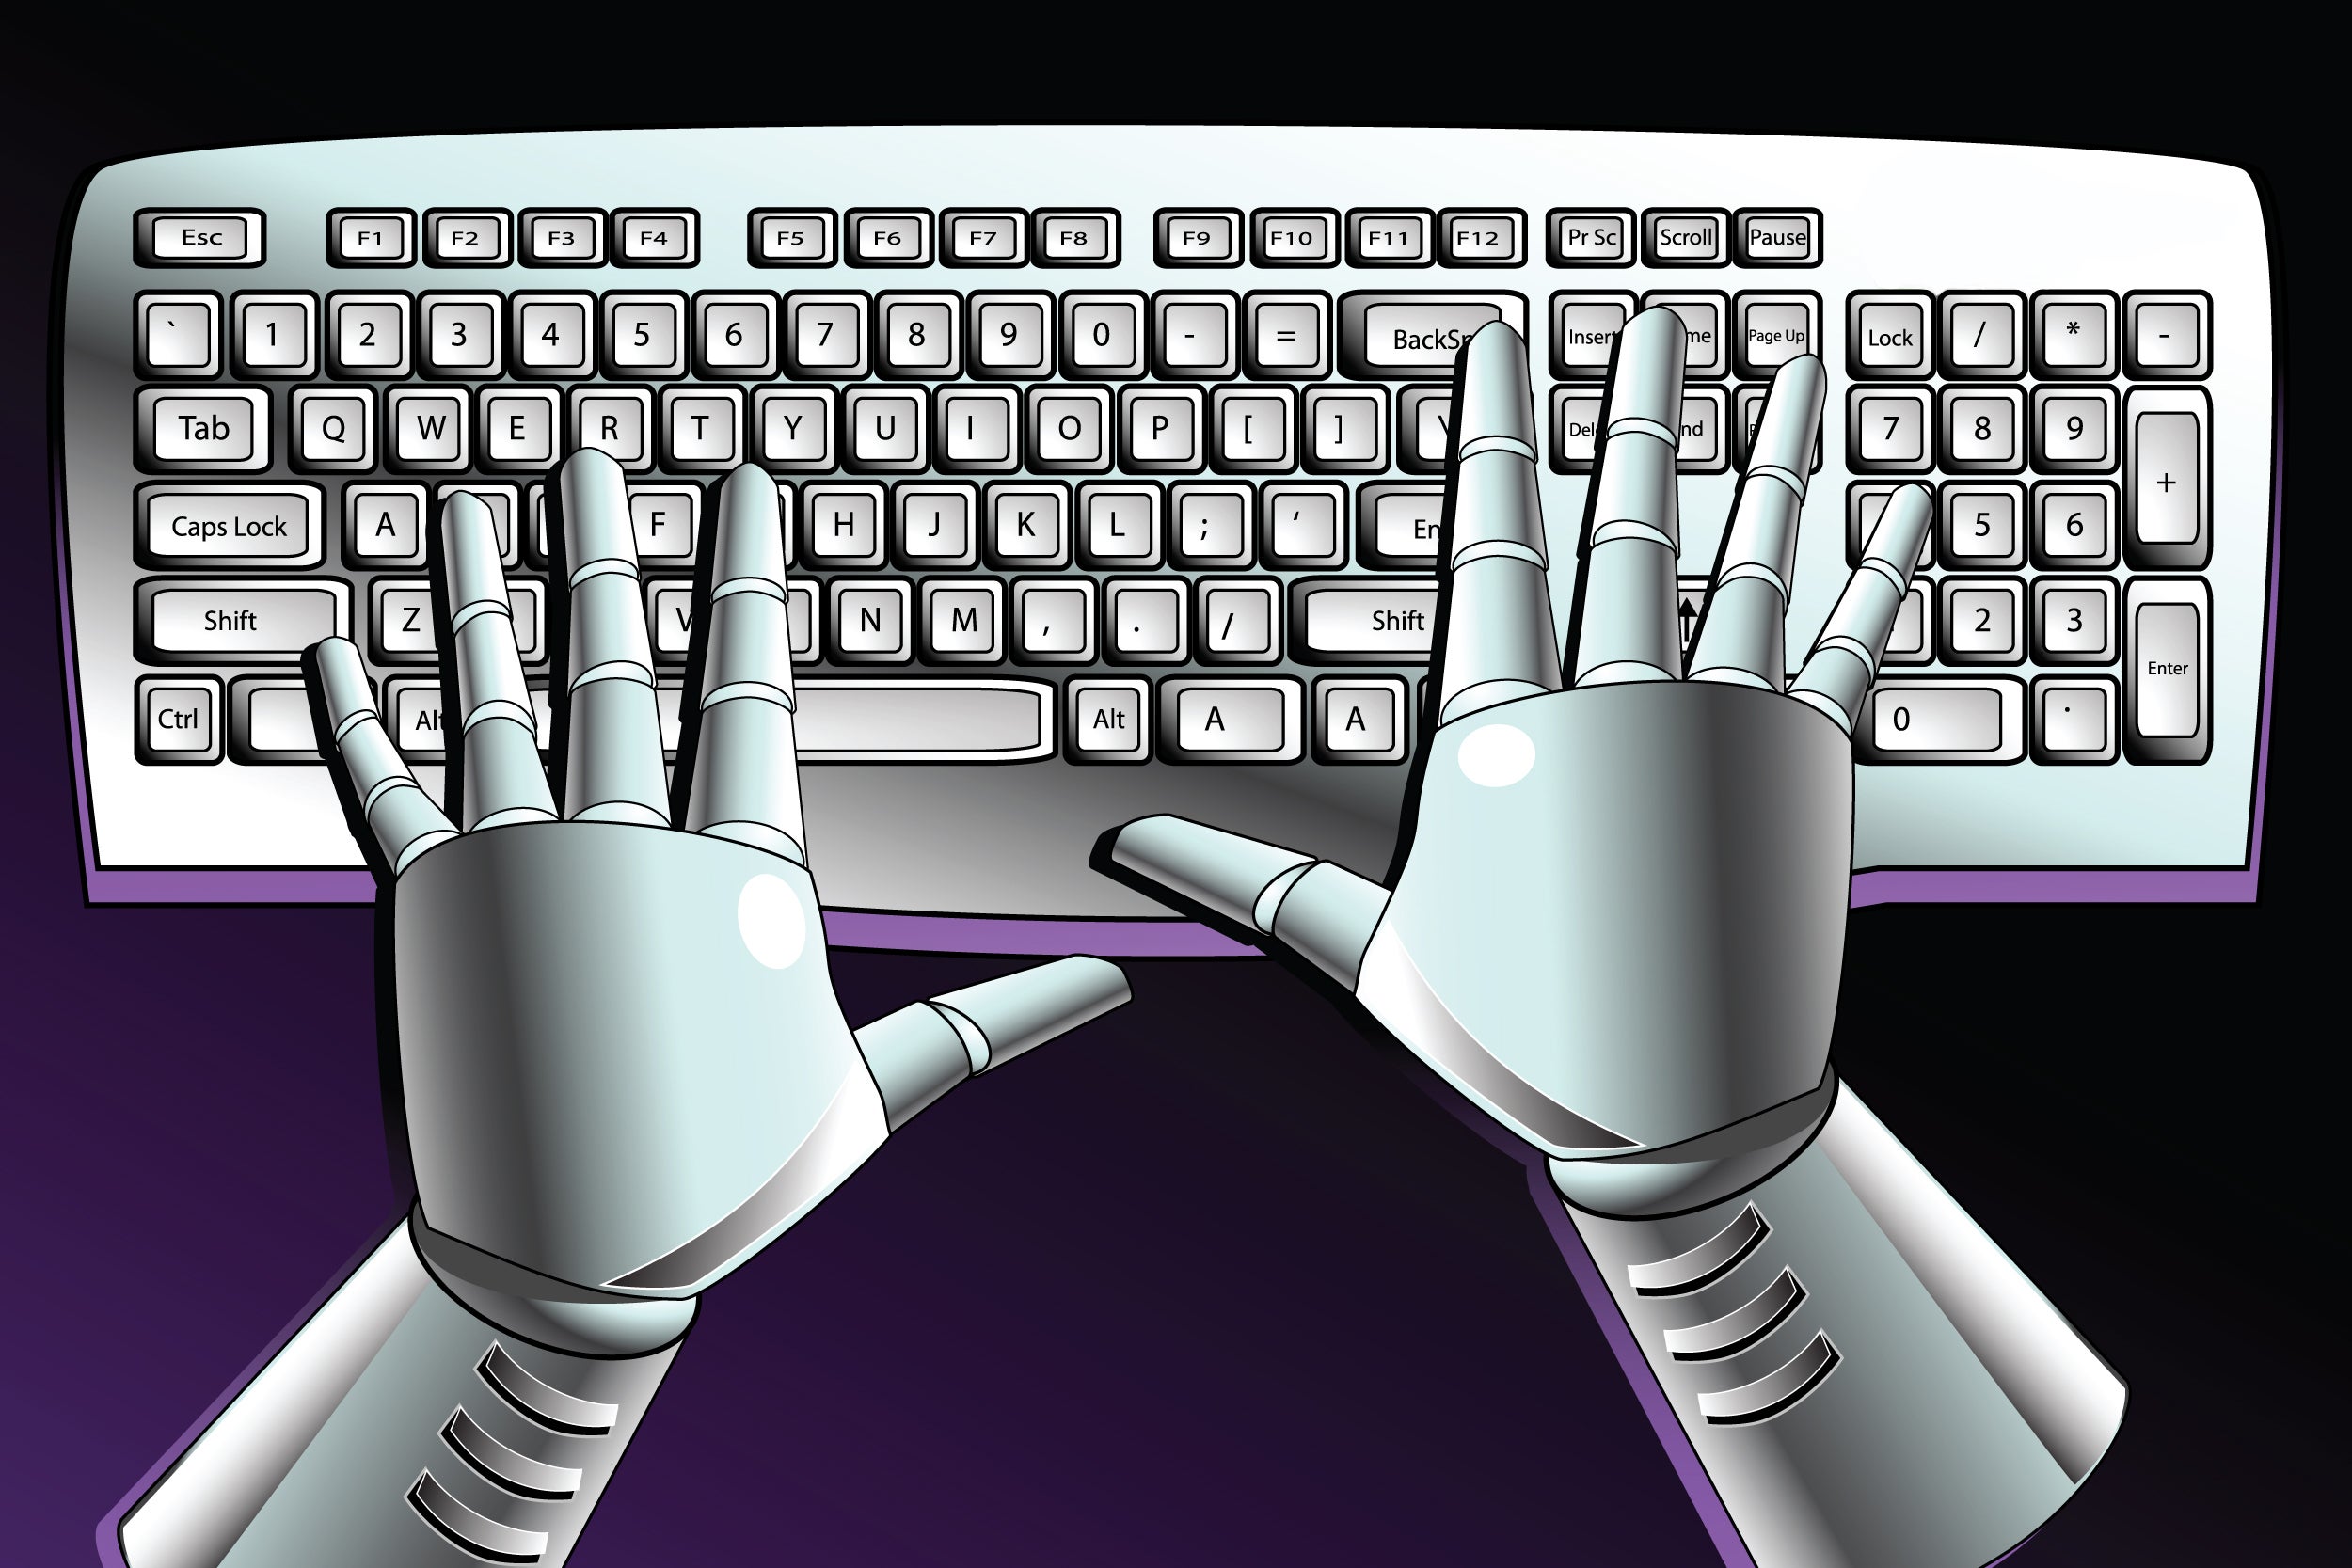 Robot's hands on keyboard.